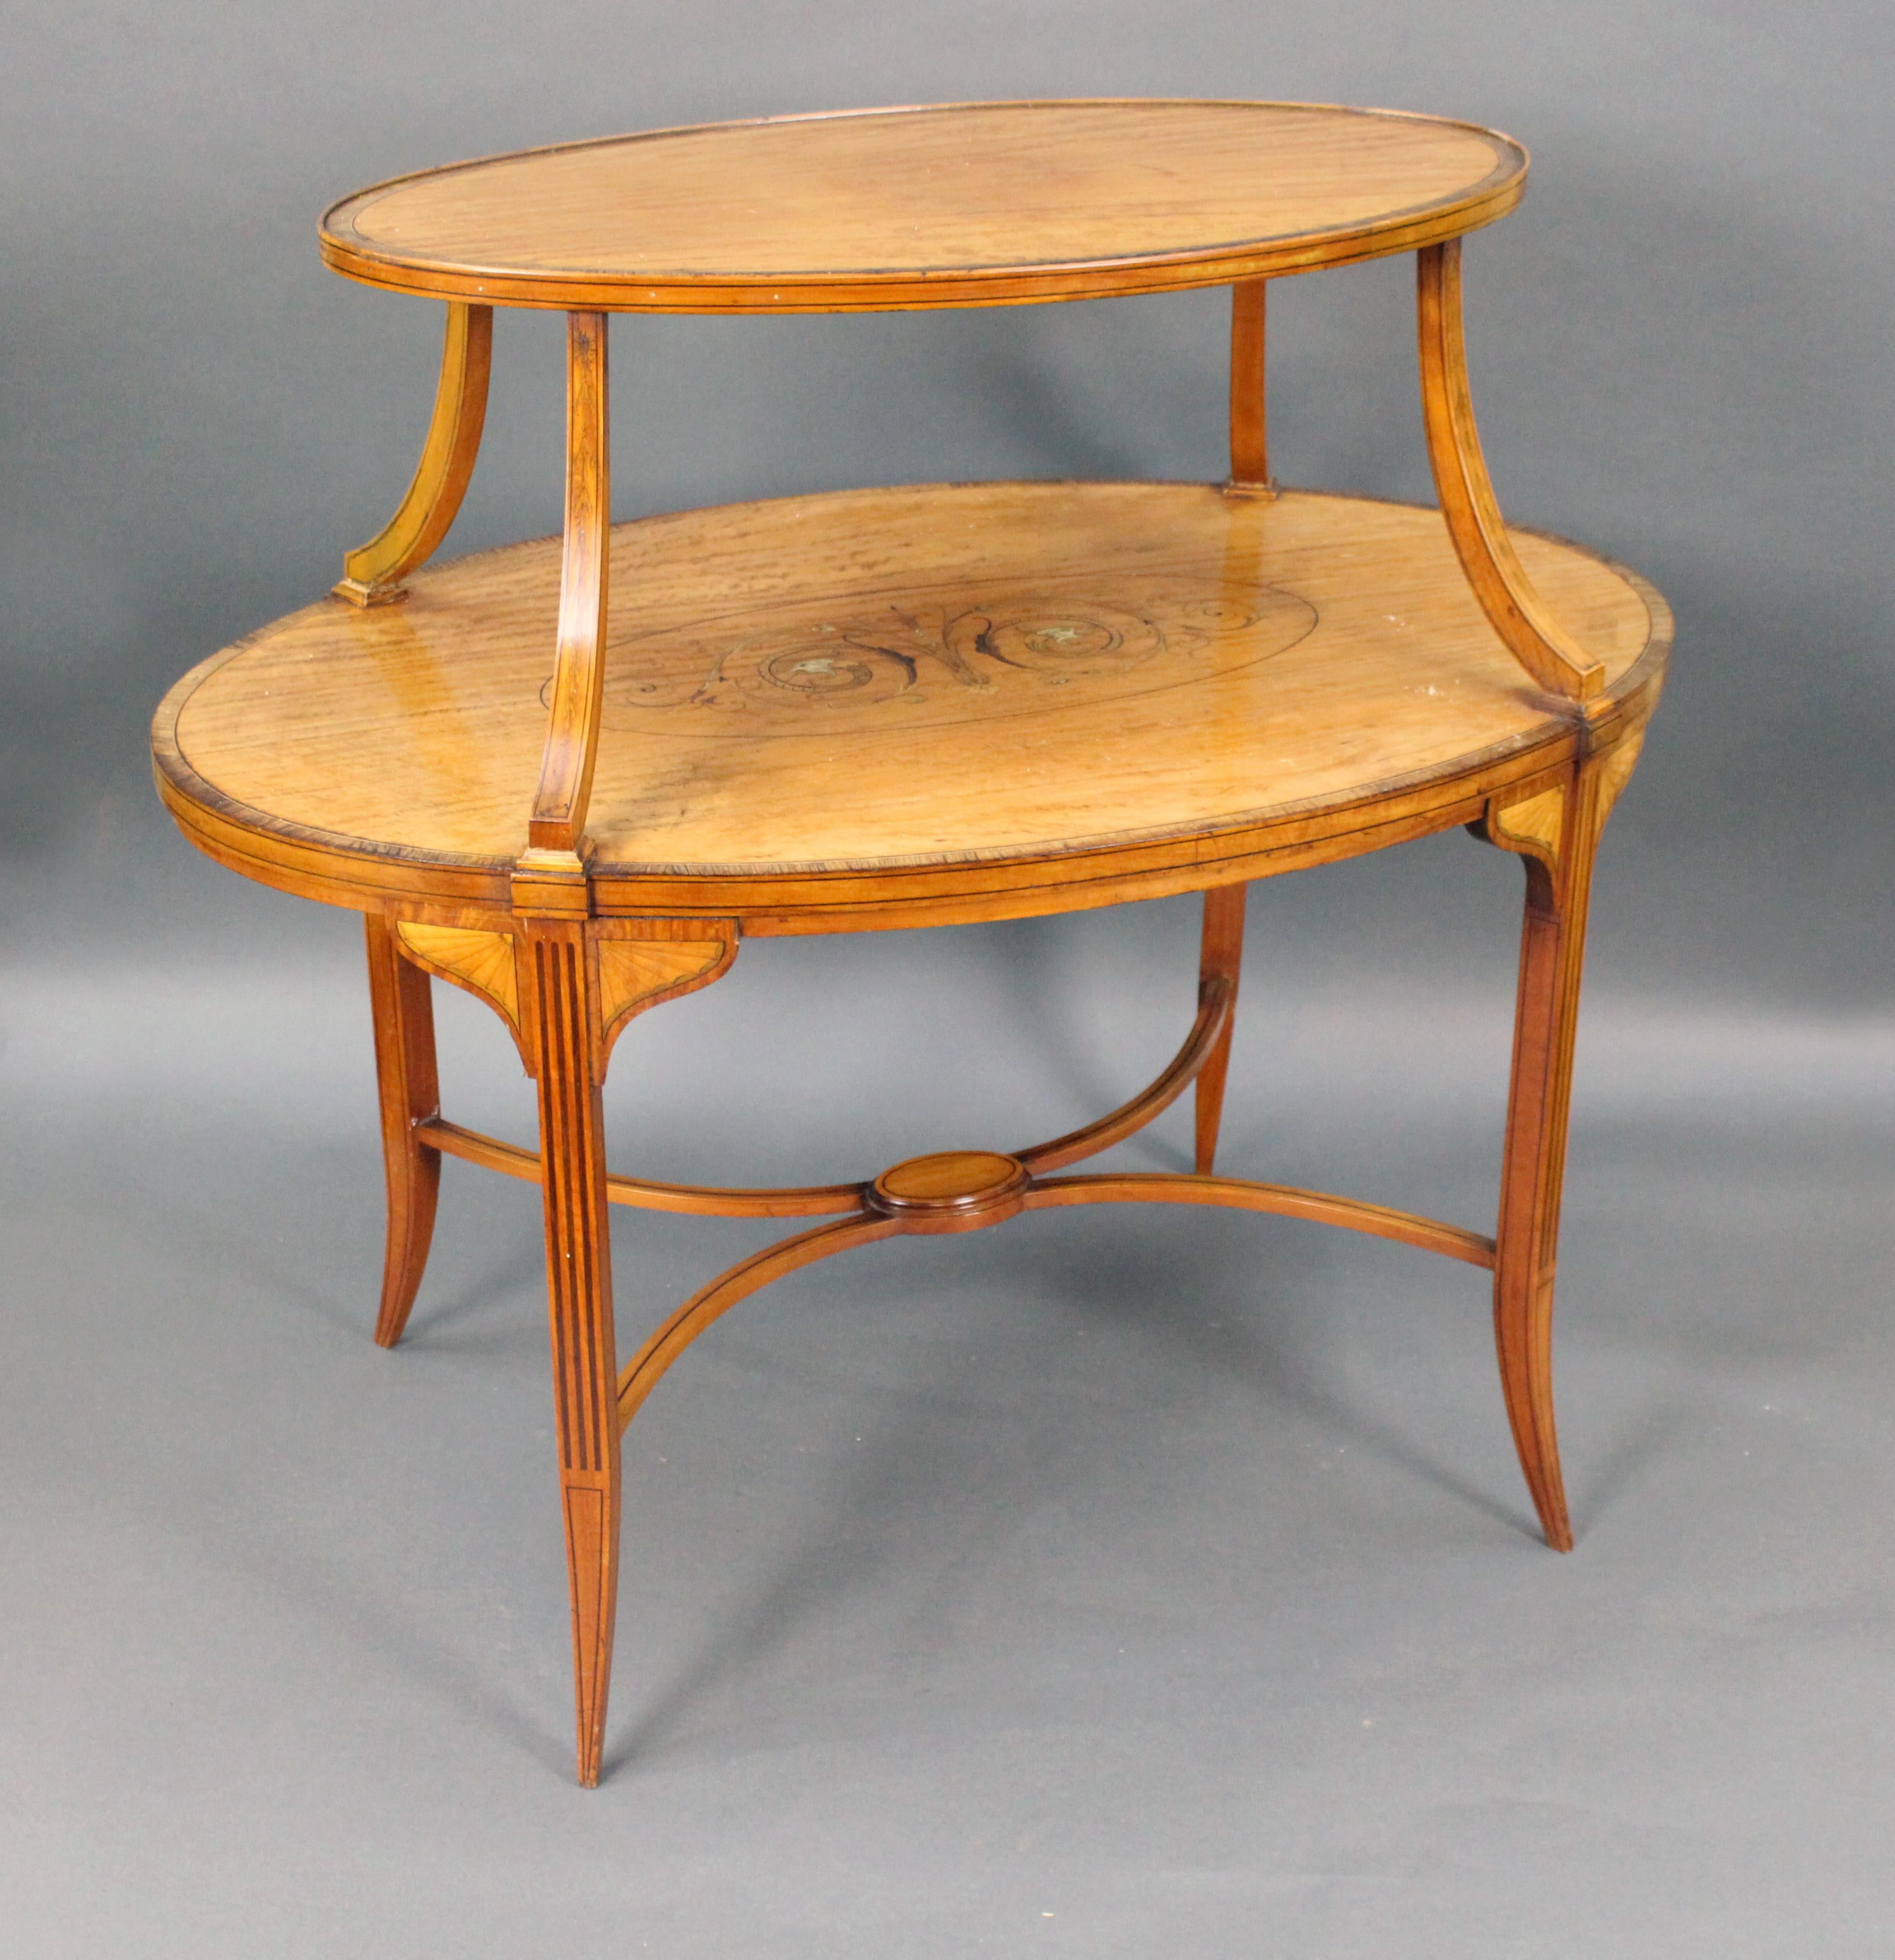 Elegant inlaid satinwood Étagère two tier table c.1890


Measures: Width 88.5 cm 35 in

Depth 55.5 cm 22 in

Height 79 cm 31 in
 

Etagere

Period Late 19th century

Wood Satinwood, inlaid

Condition Very good condition commensurate